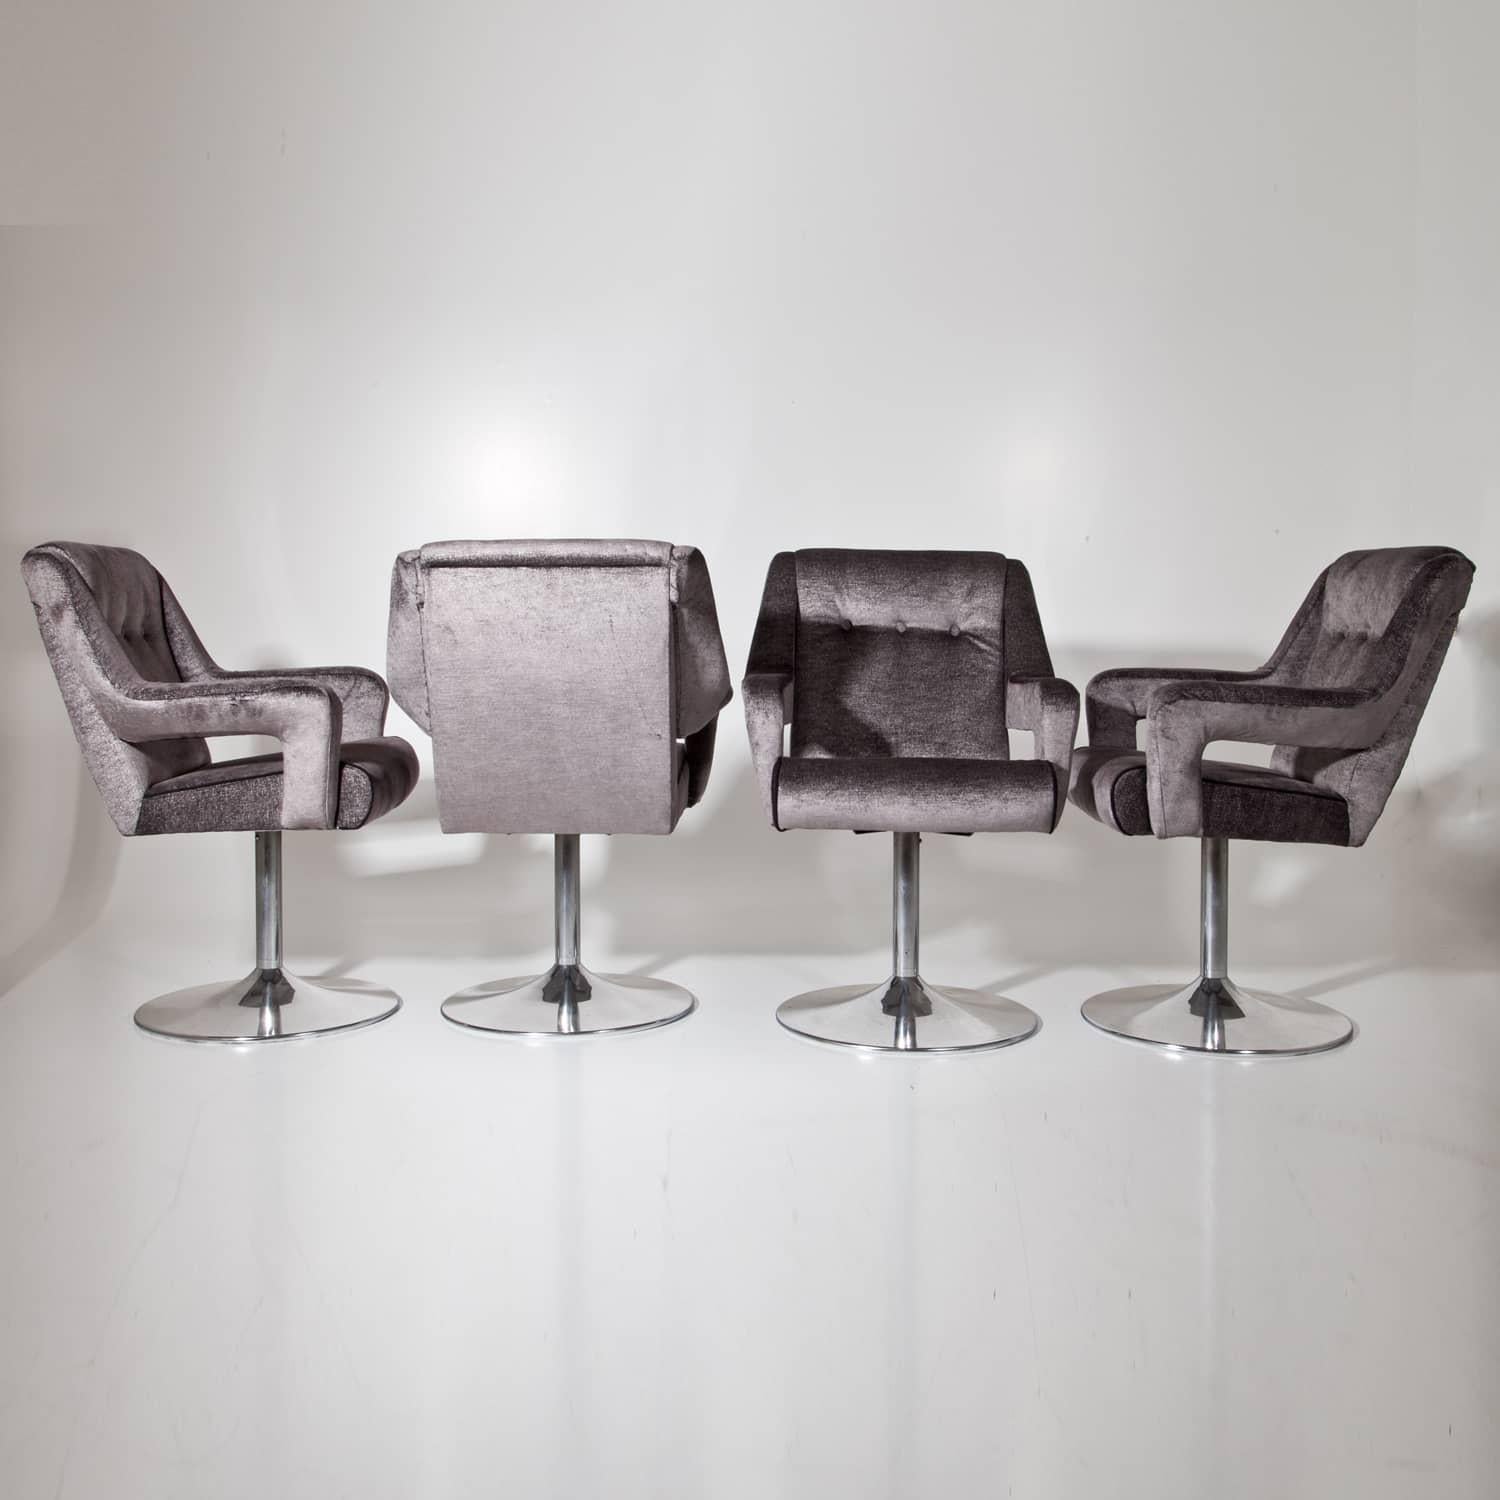 Mid-Century Modern Set of Four Metal Swivel Chairs, Italy, Mid-20th Century For Sale